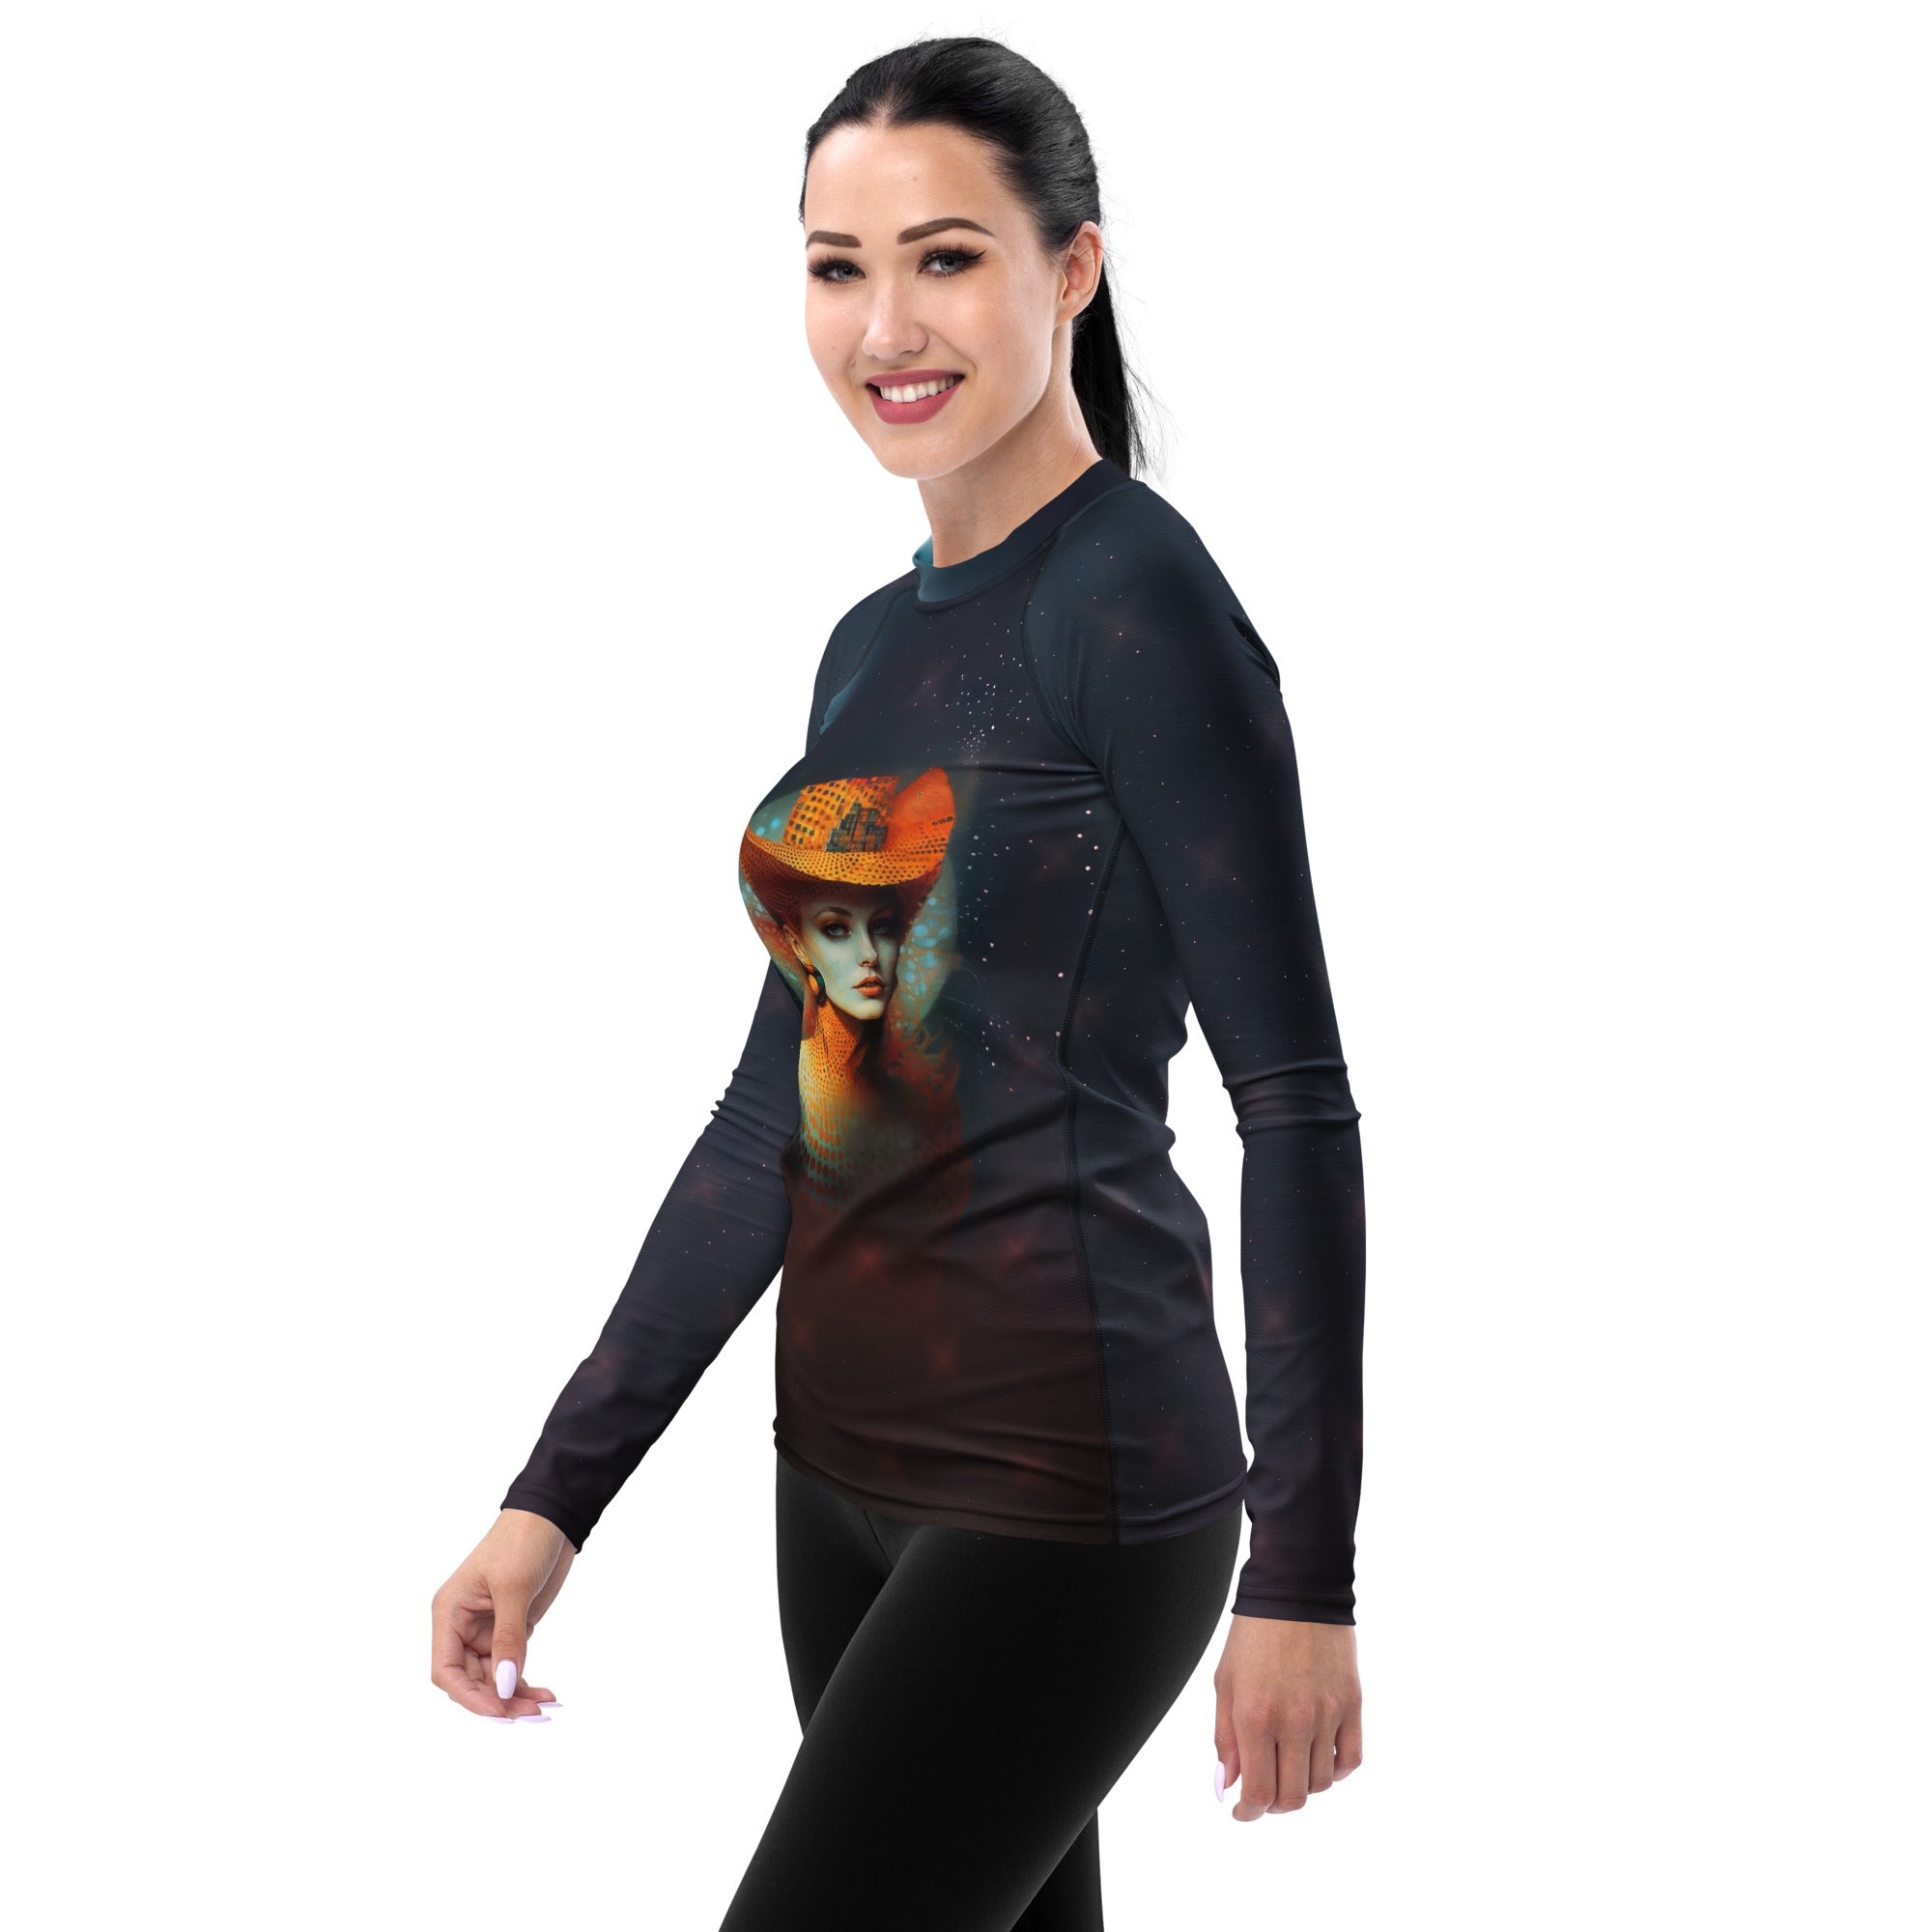 Galactic Expedition Rash Guard styled for water sports and adventures.